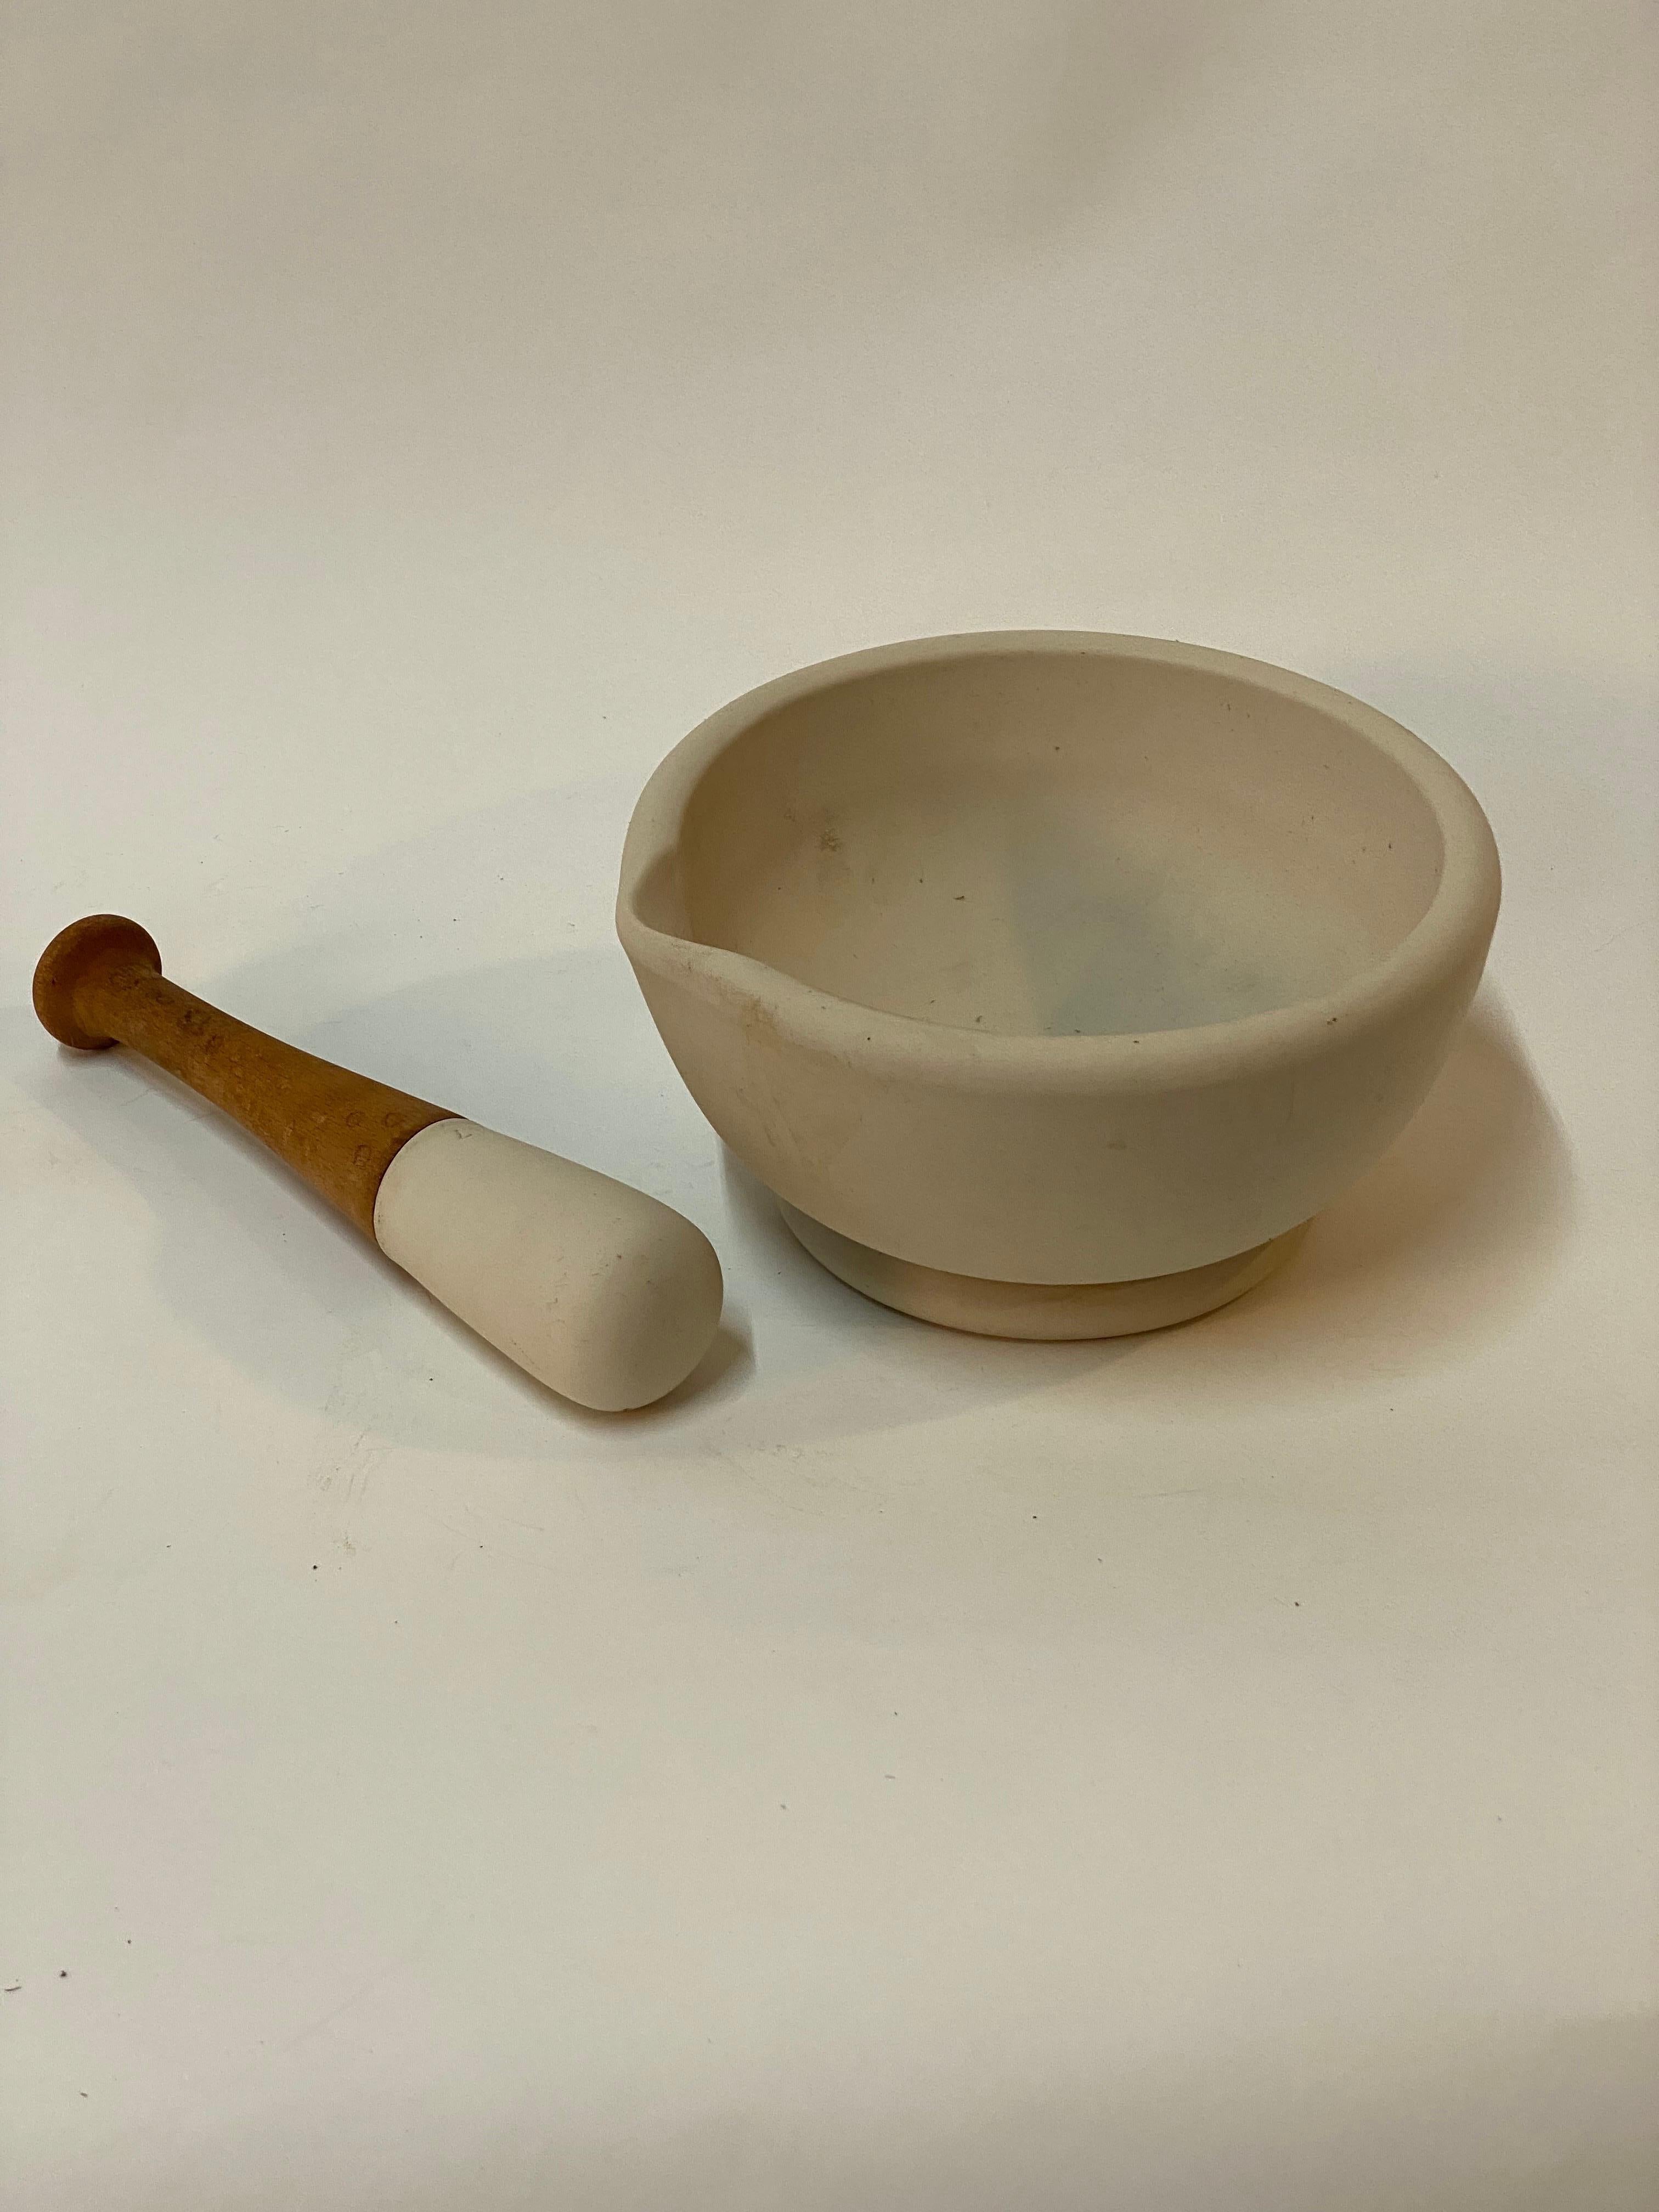 English Porcelain Mortar and Pestle #7 In Good Condition For Sale In Garnerville, NY